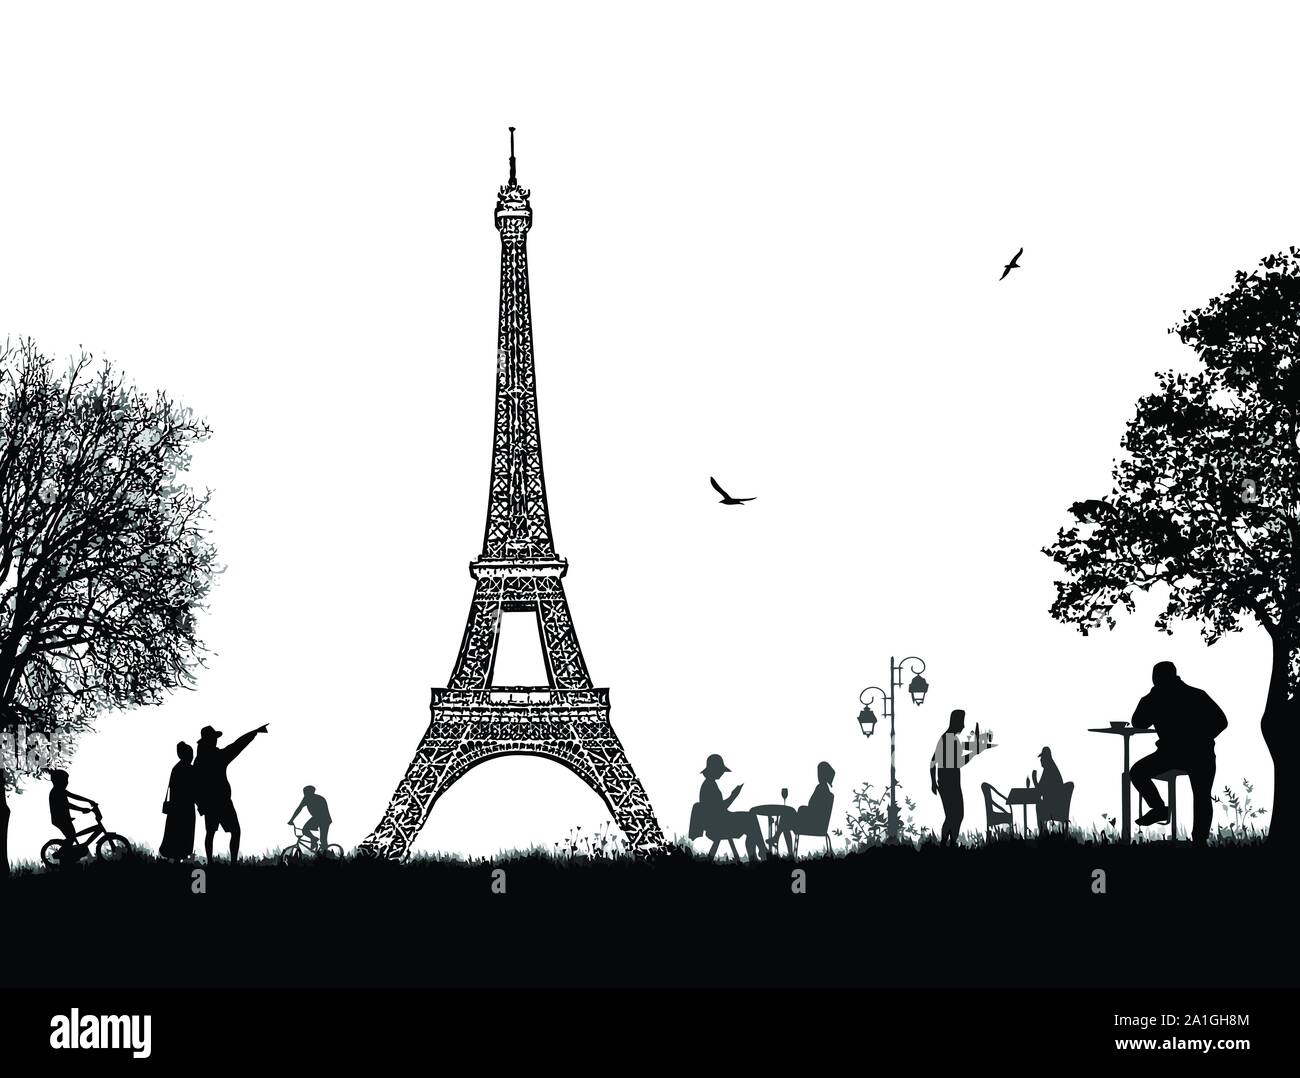 Beautiful landscape design with Eiffel Tower and people silhouettes on white background, vector illustration Stock Vector